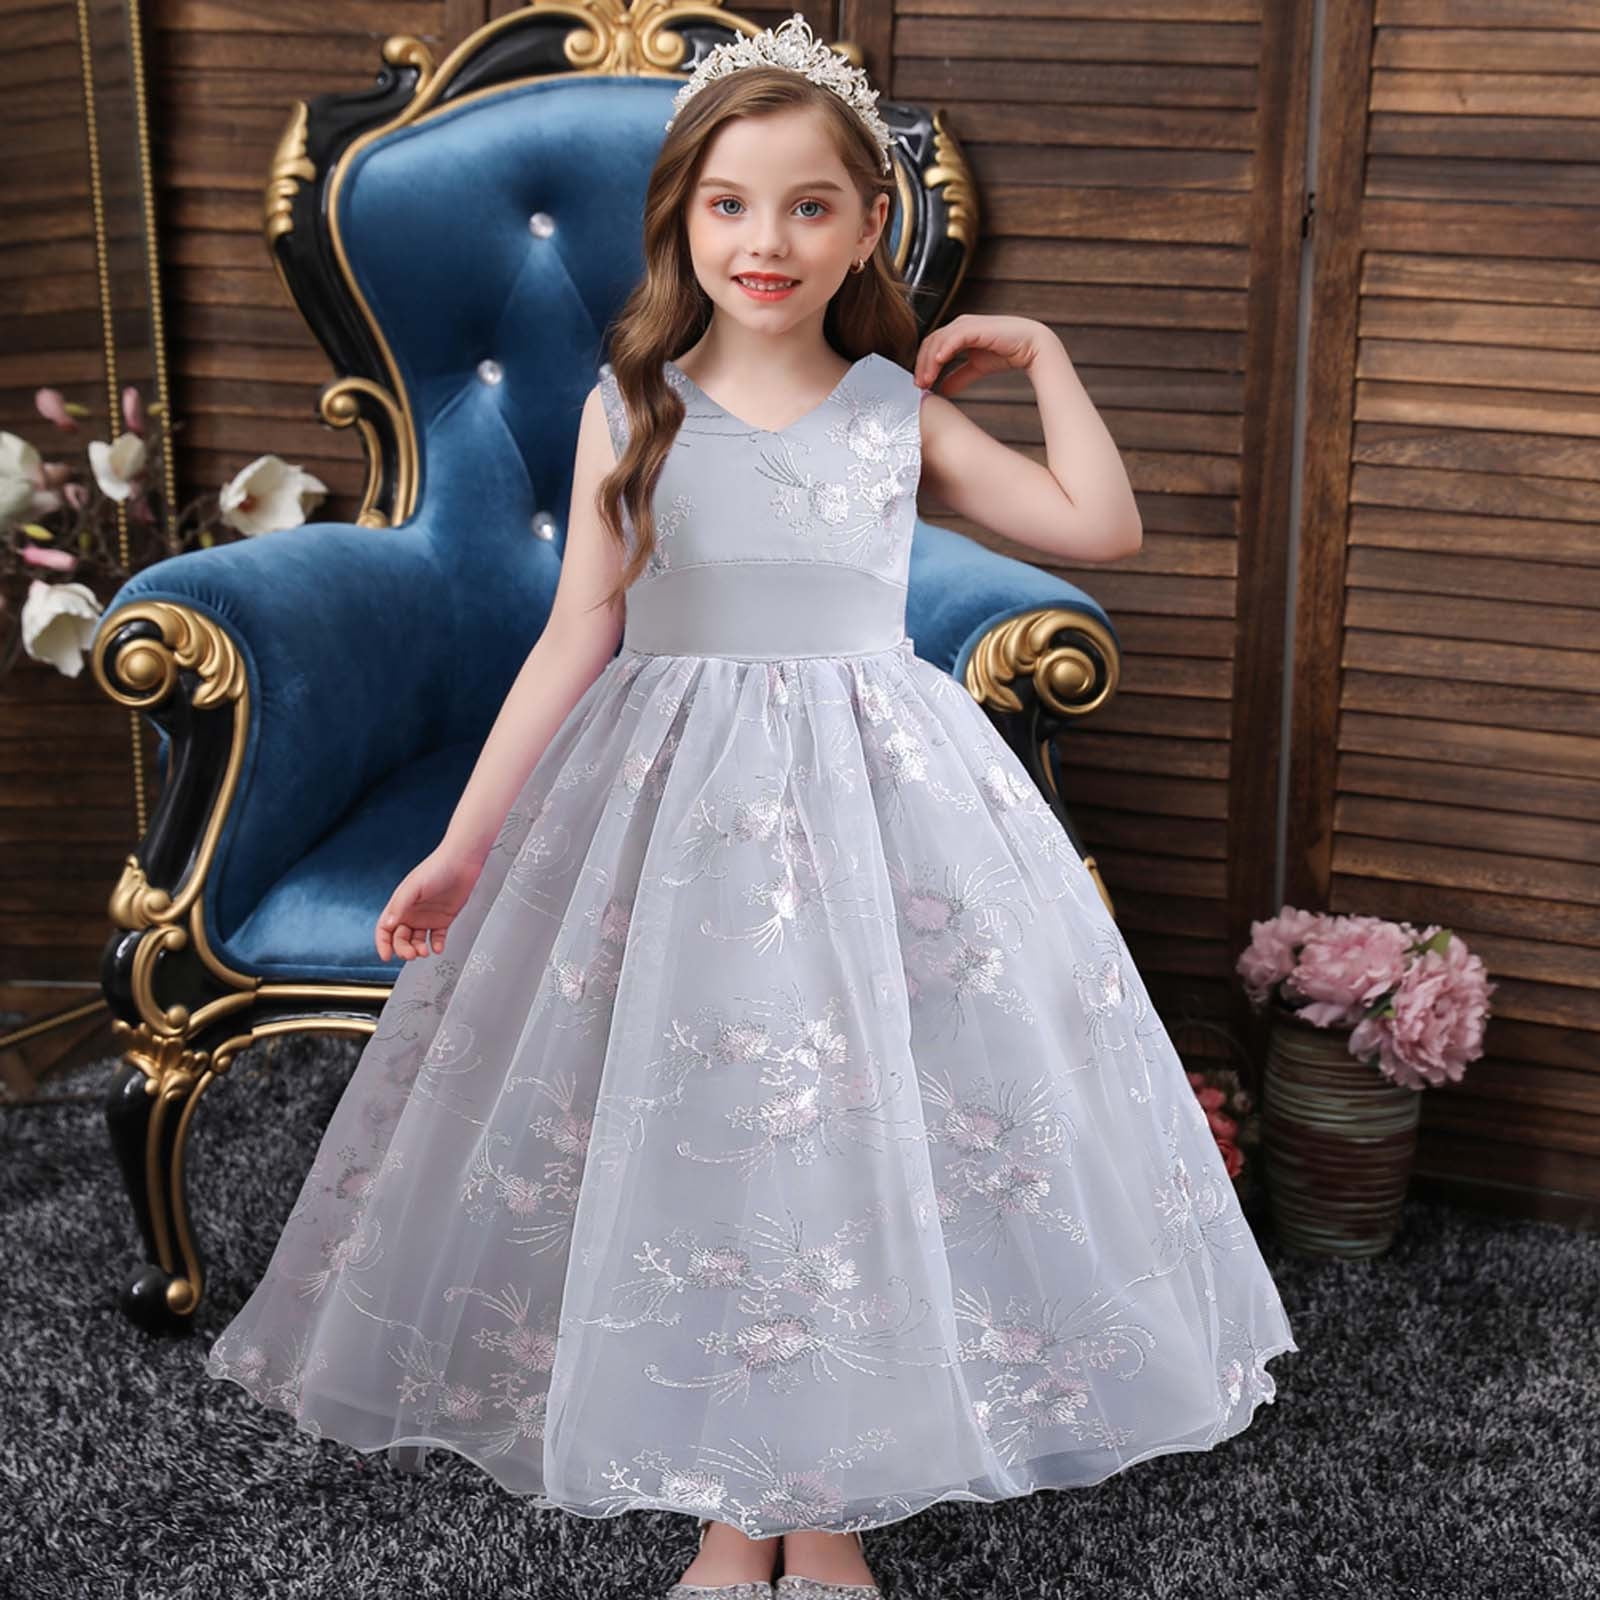 New Party Gowns Girls | Party Dresses 3 Year Olds | Party Dresses Girls | Gown  Girl 3 Us - Girls Party Dresses - Aliexpress